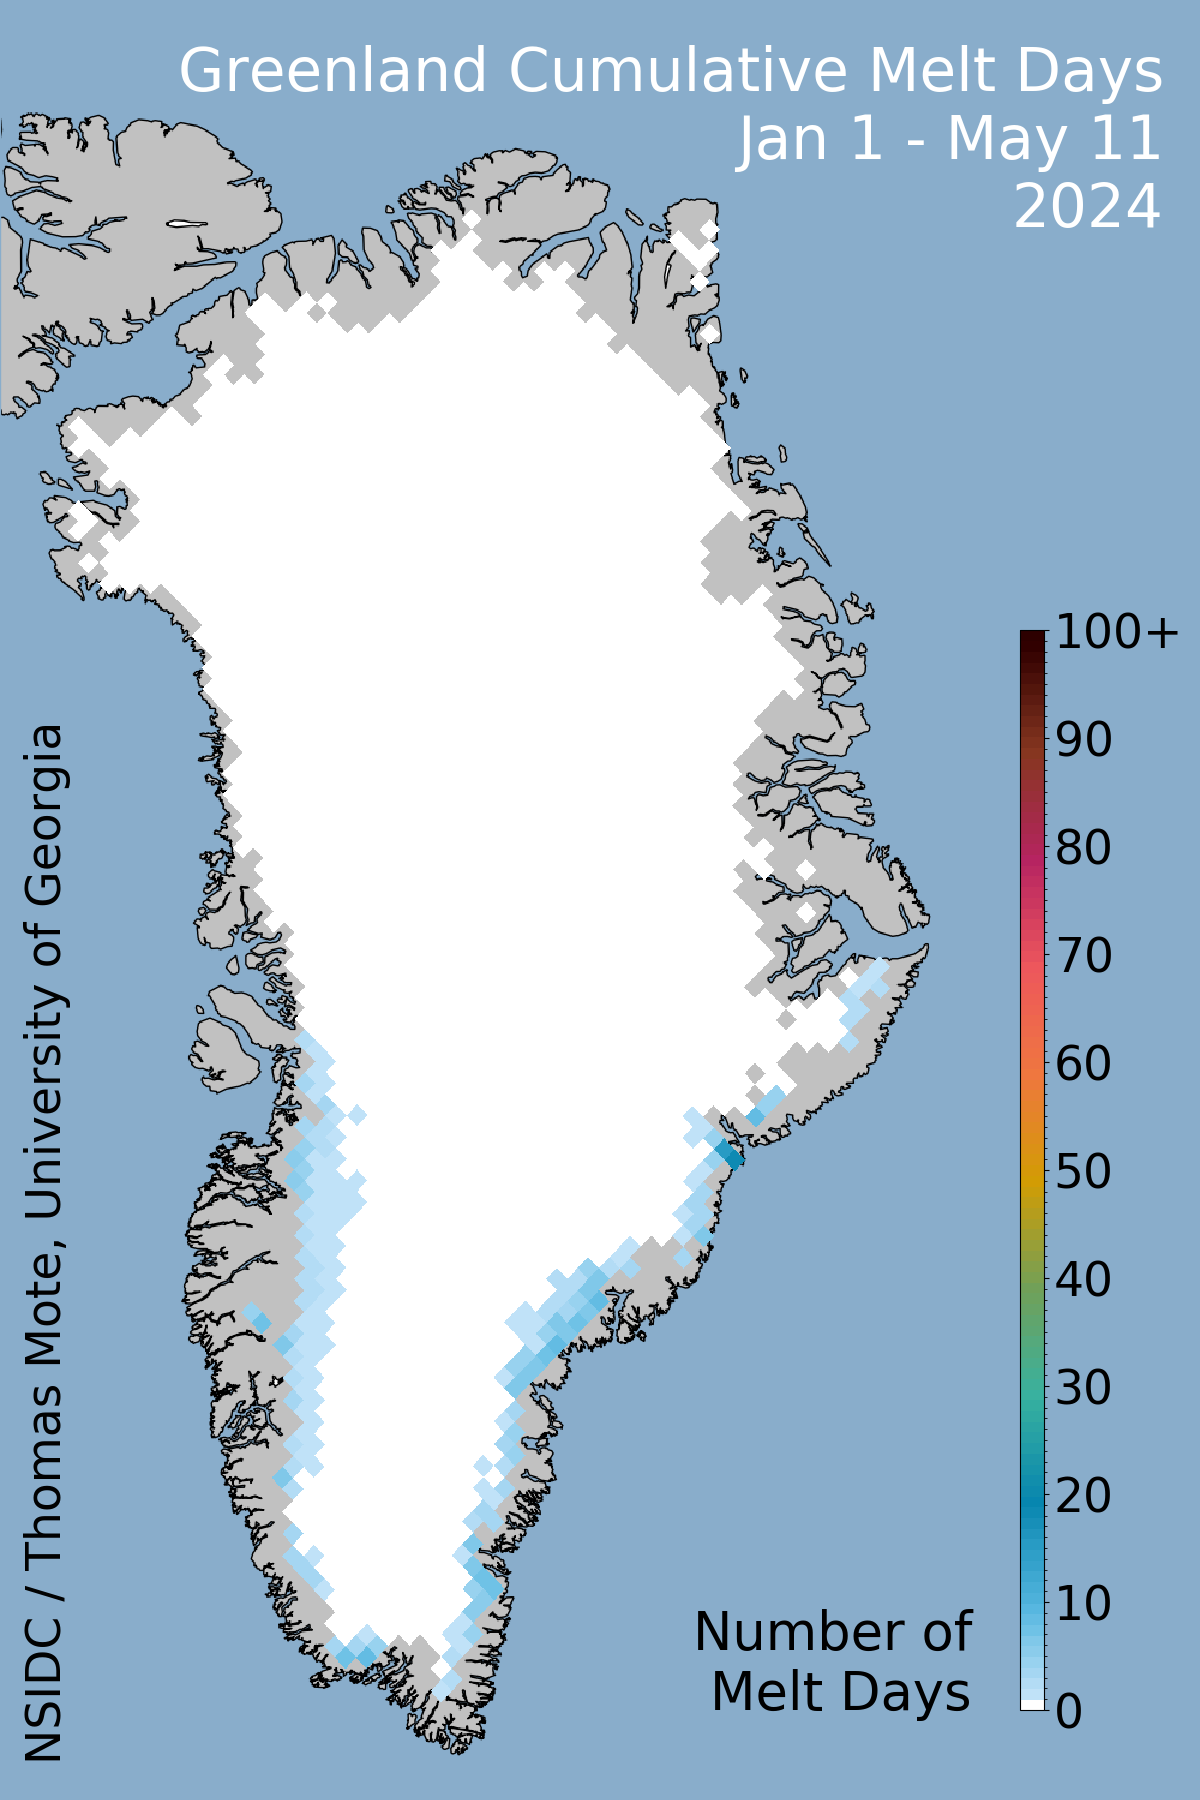 daily-images-greenland-ice-sheet-today